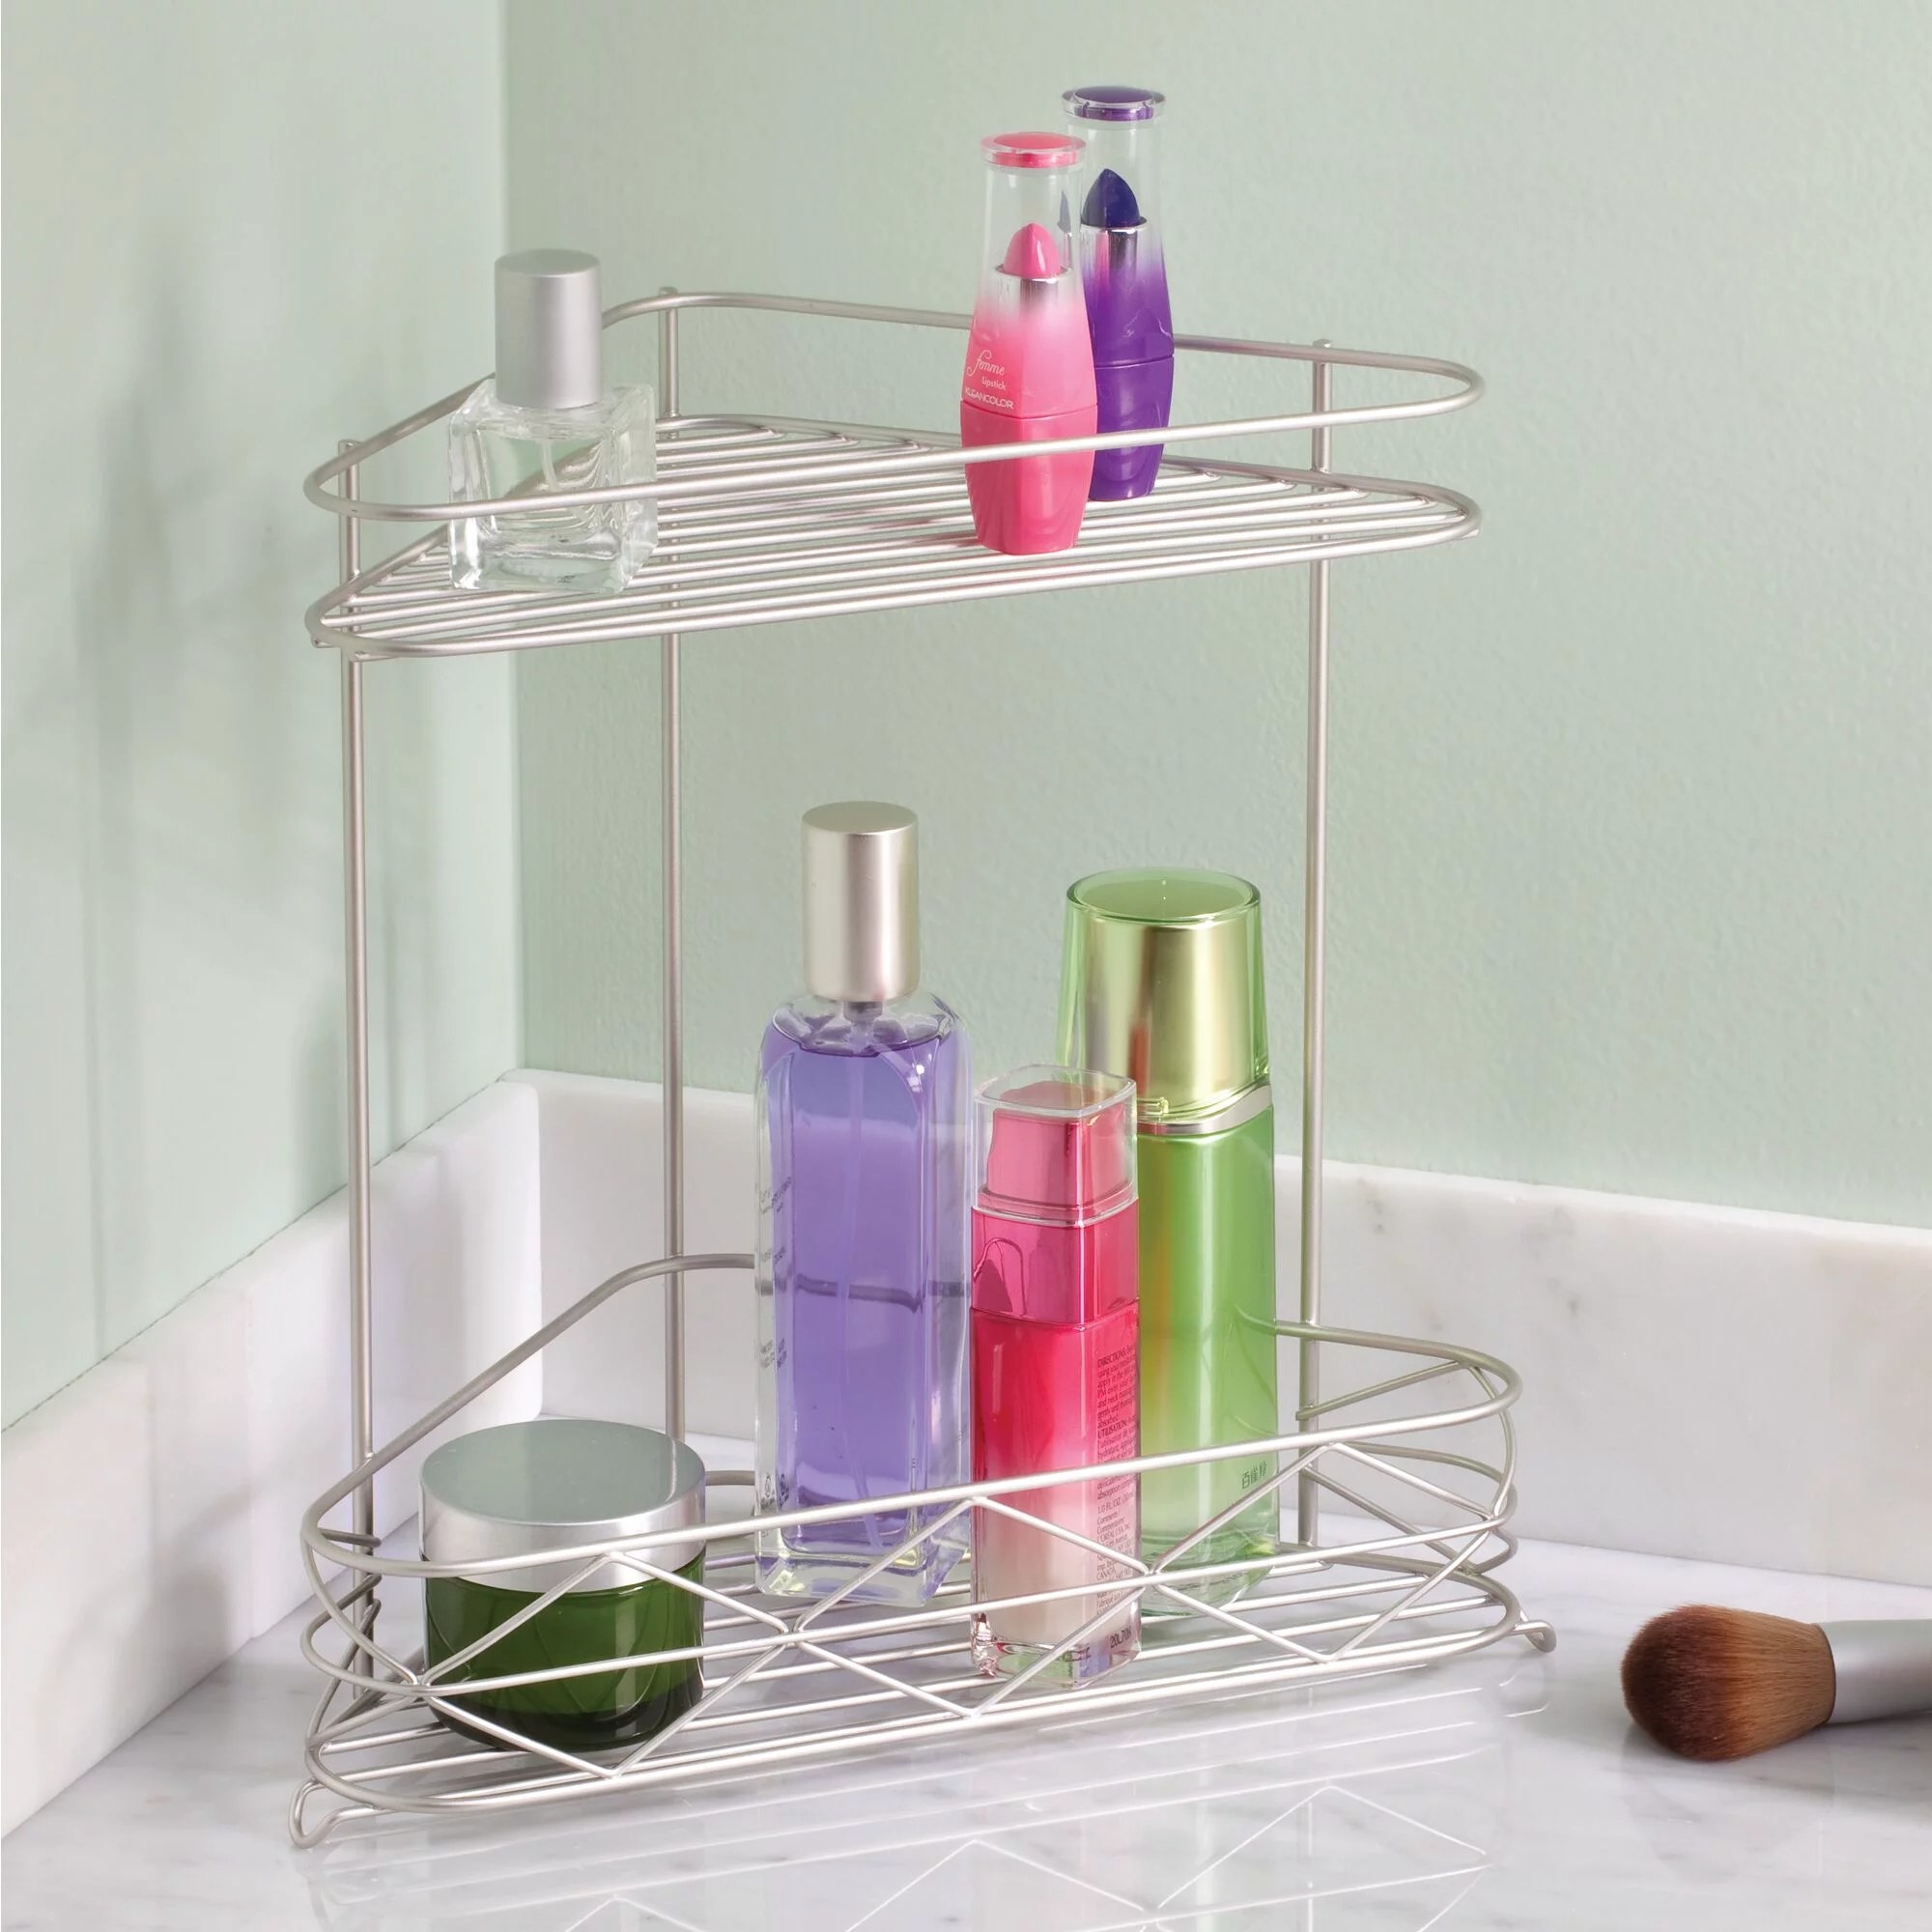 the storage caddy in the color Satin with bottles inside